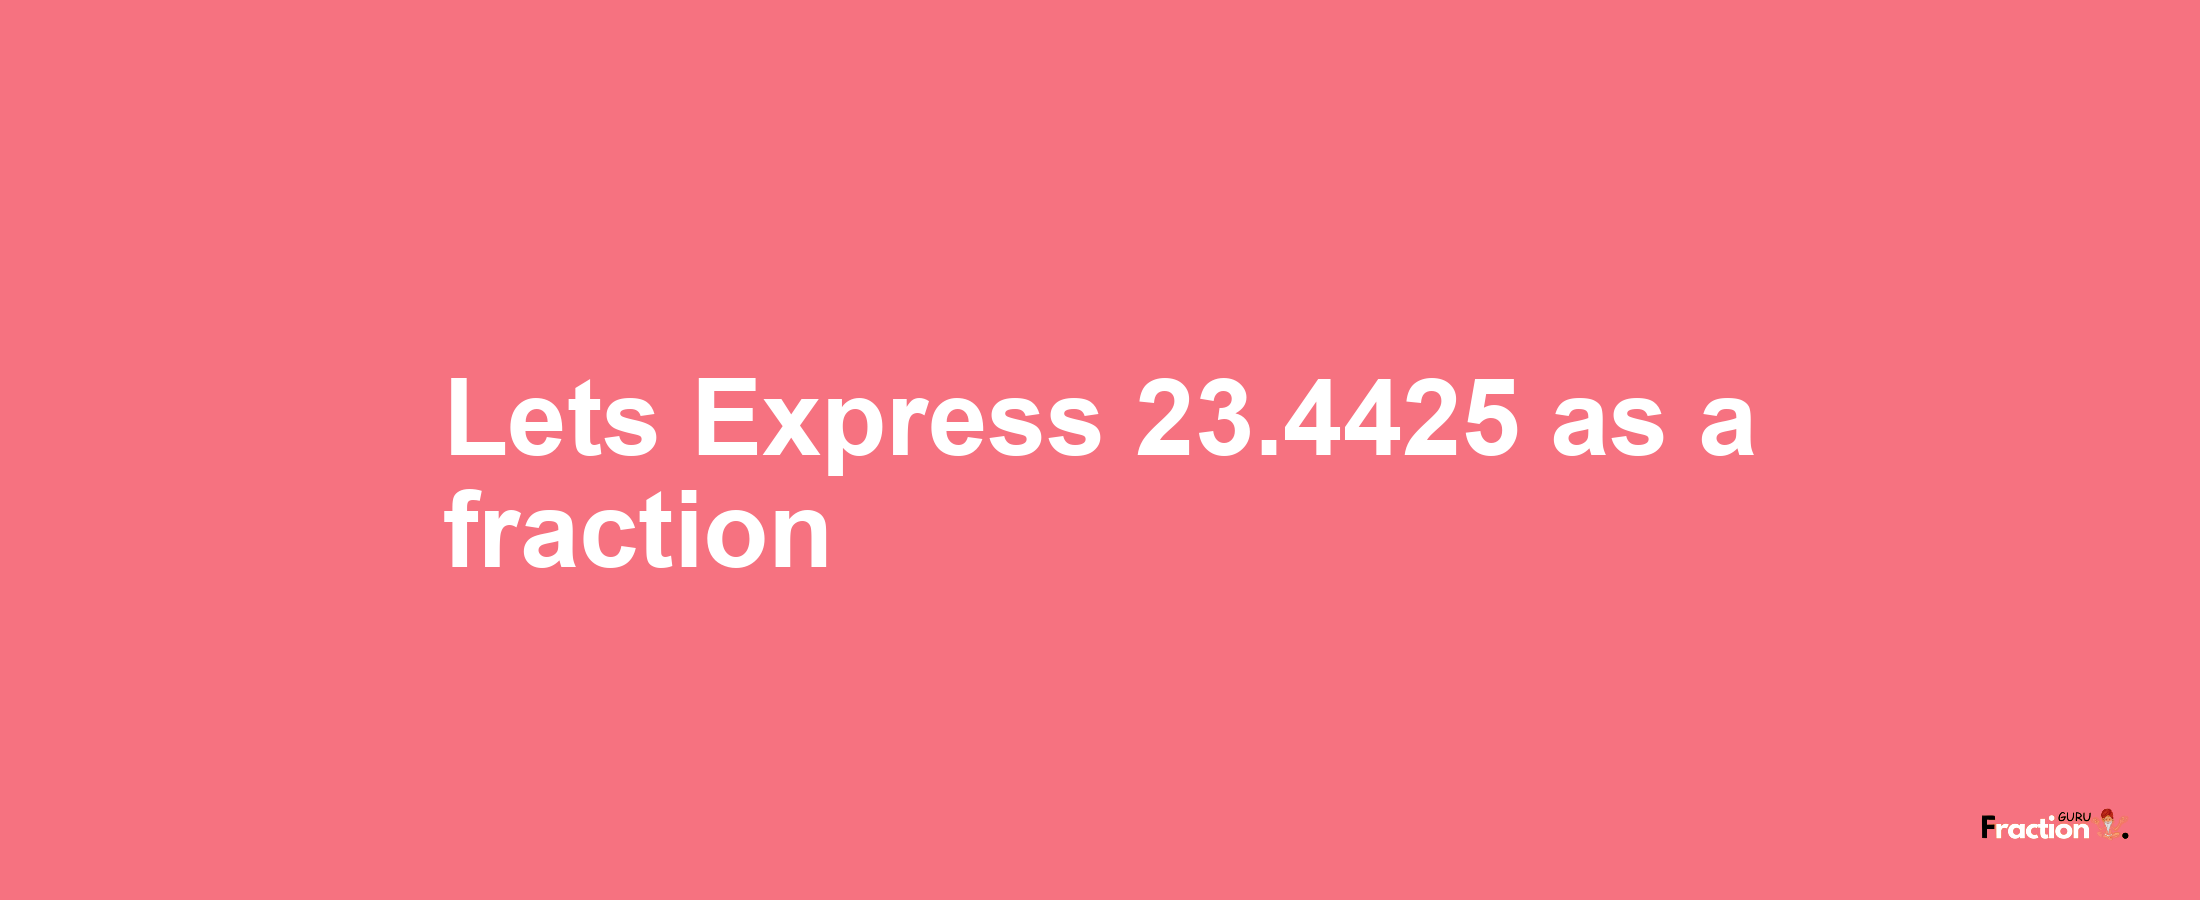 Lets Express 23.4425 as afraction